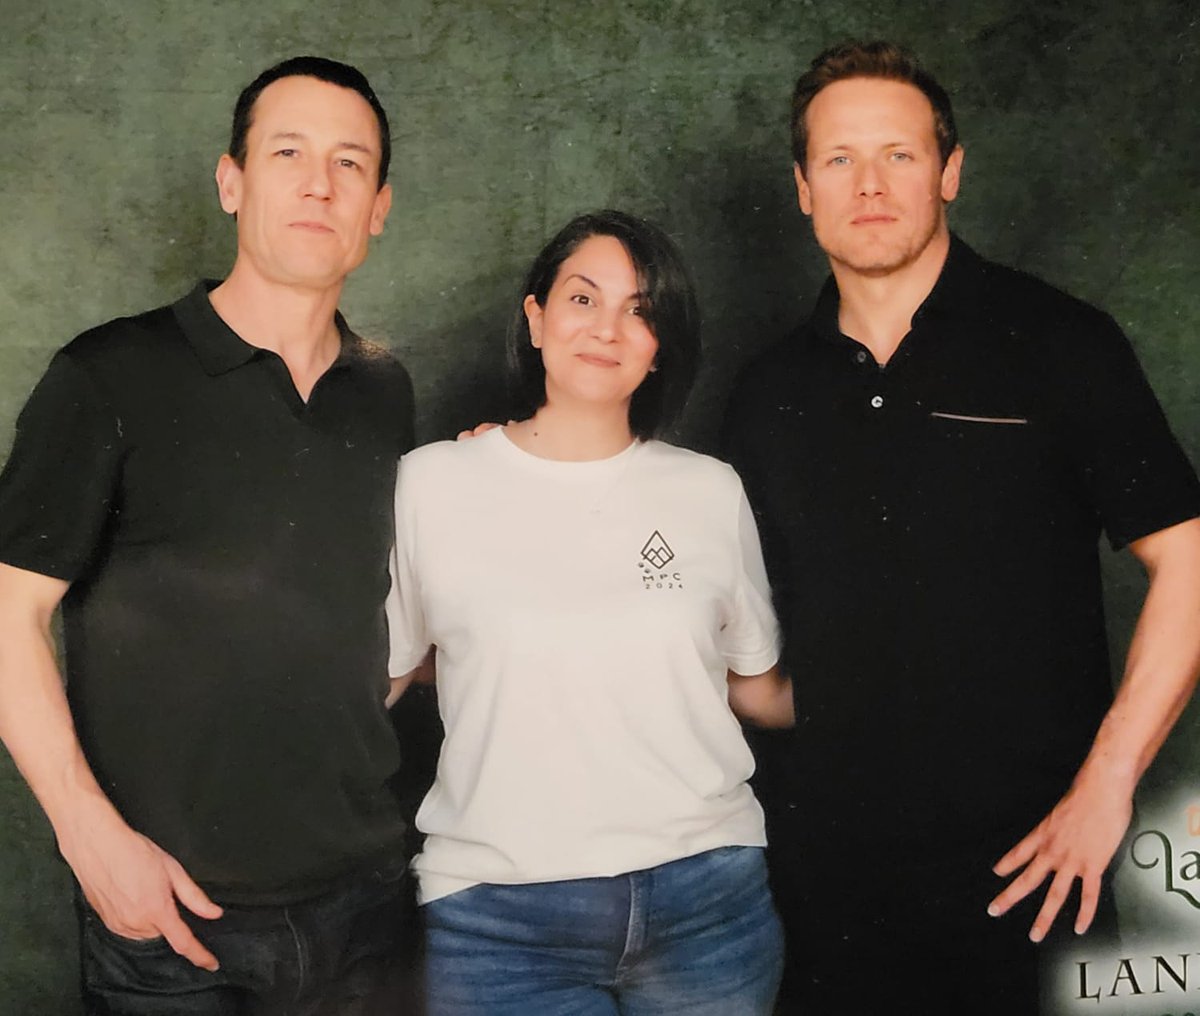 And this ⬇️ happened 🙌🏼 Some people have an aura. A presence, an indescribable presence. These 2 are part of it. So generous, respectful, always a kind word. They gave us everything. THANKS. Sincerely. #FeelingSafe #Outlander #TheLandCon6 @SamHeughan @TobiasMenzies